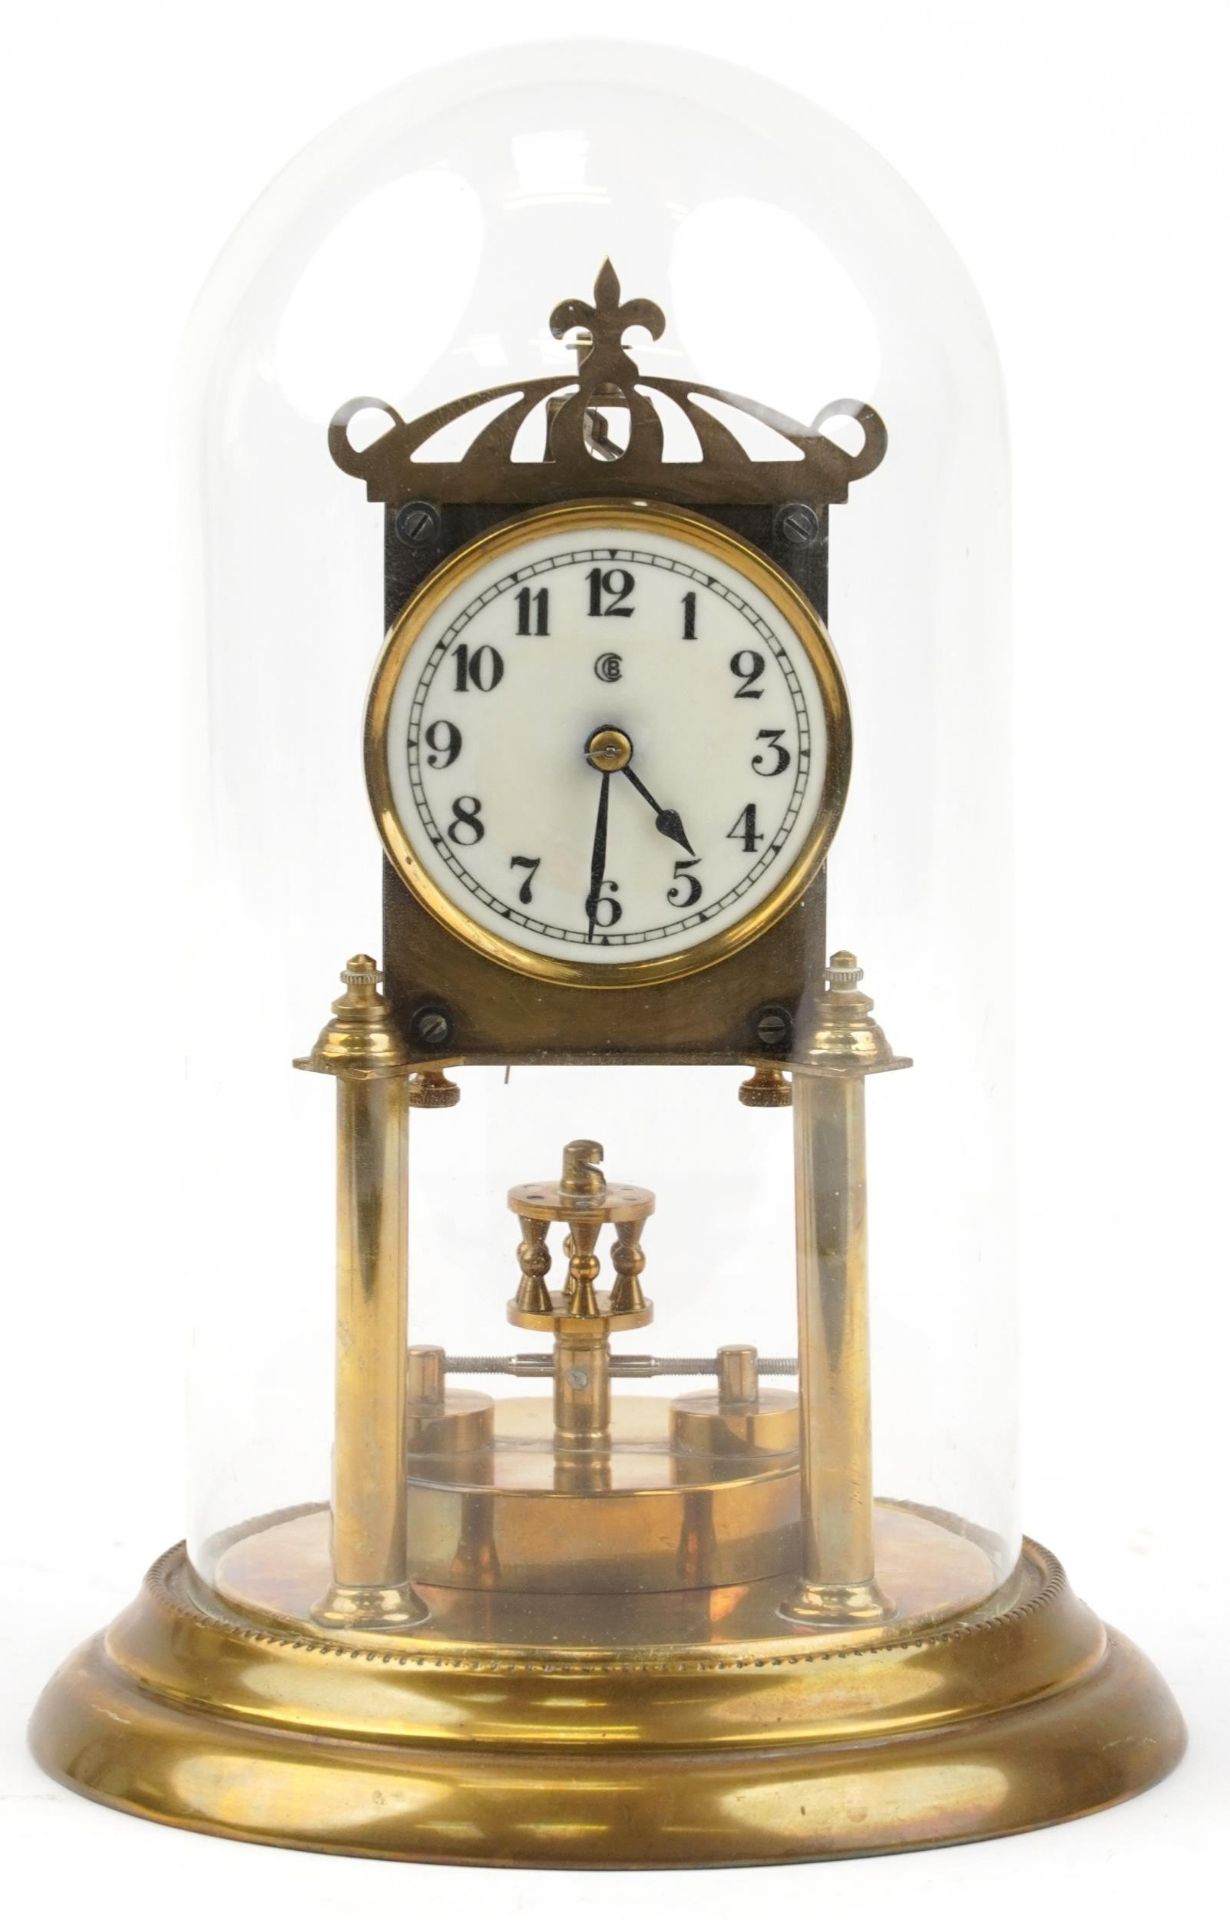 Early 20th century brass anniversary clock with glass dome and enamelled dial having Arabic